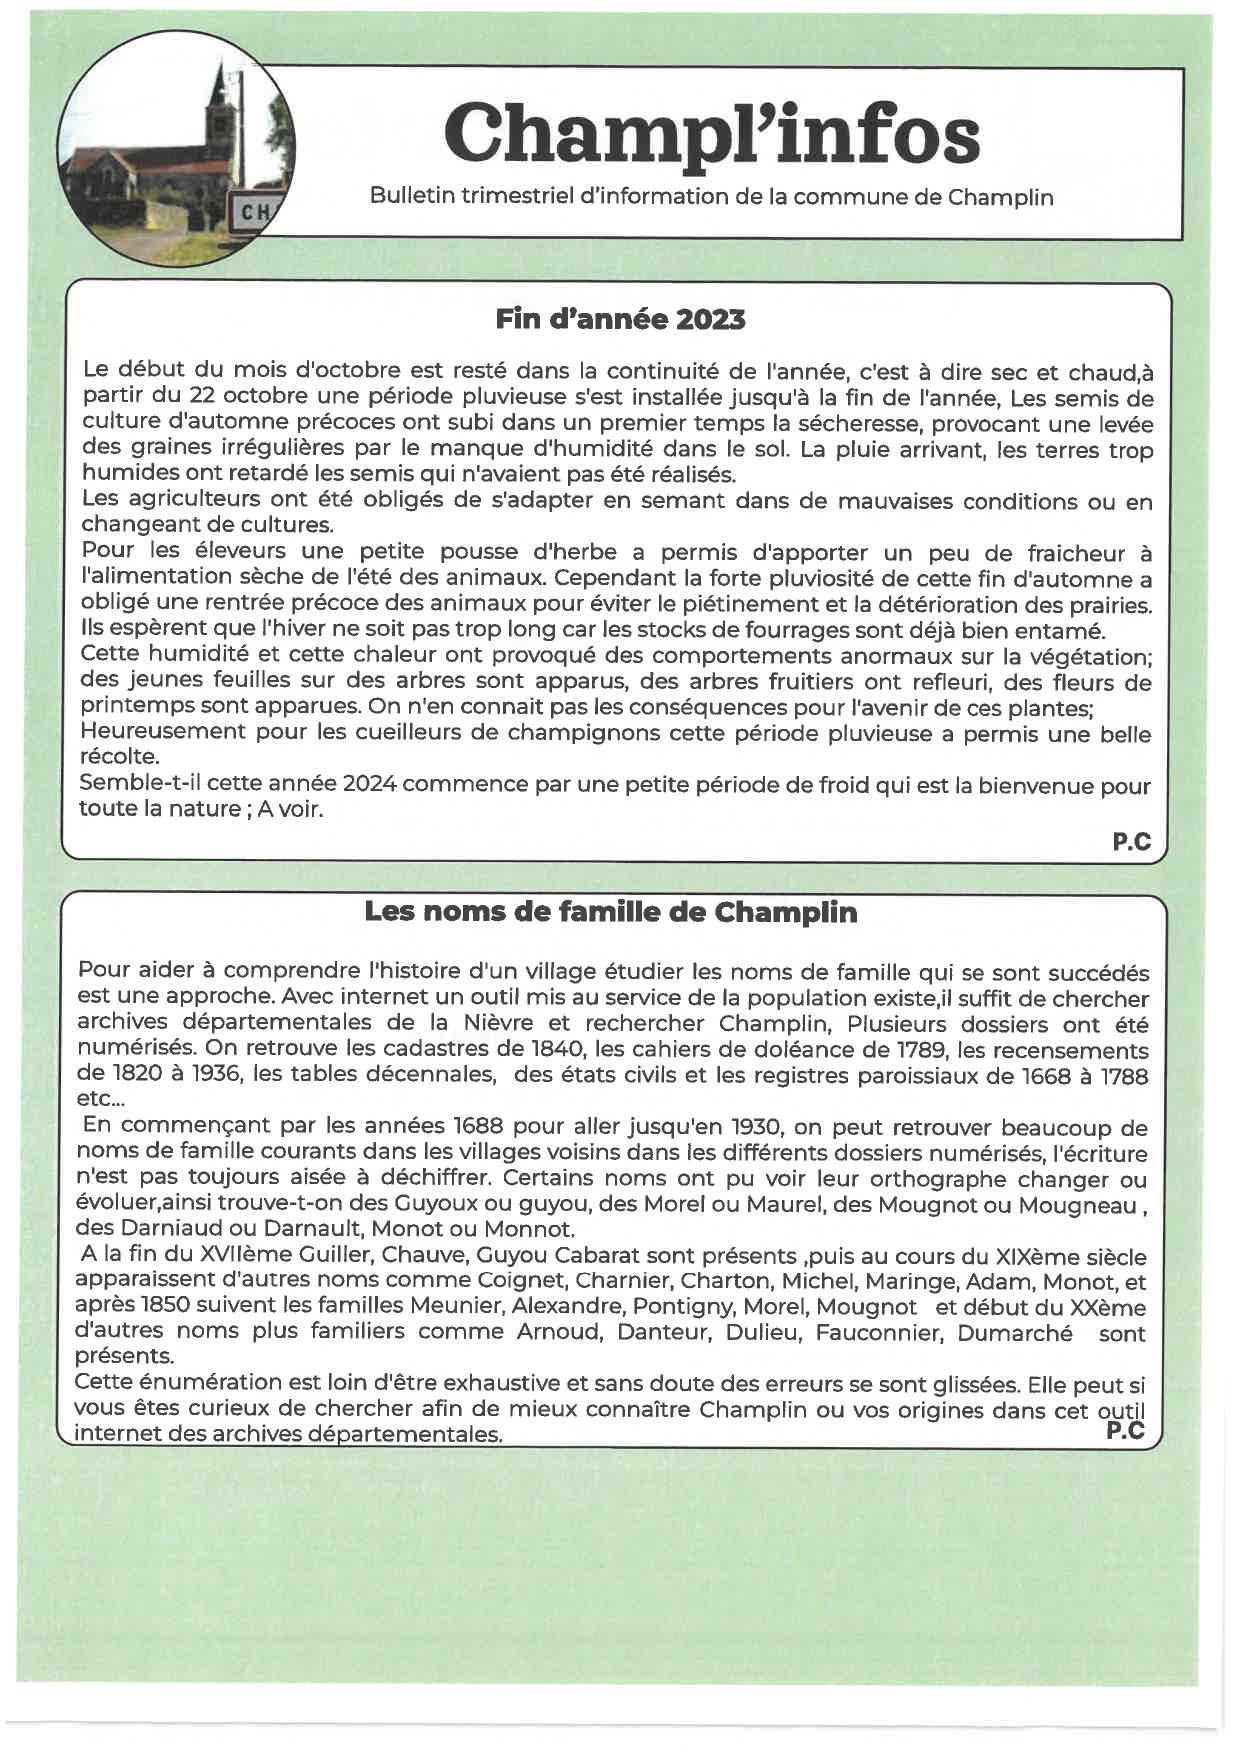 Champl infos n 14 pages to jpg 0003